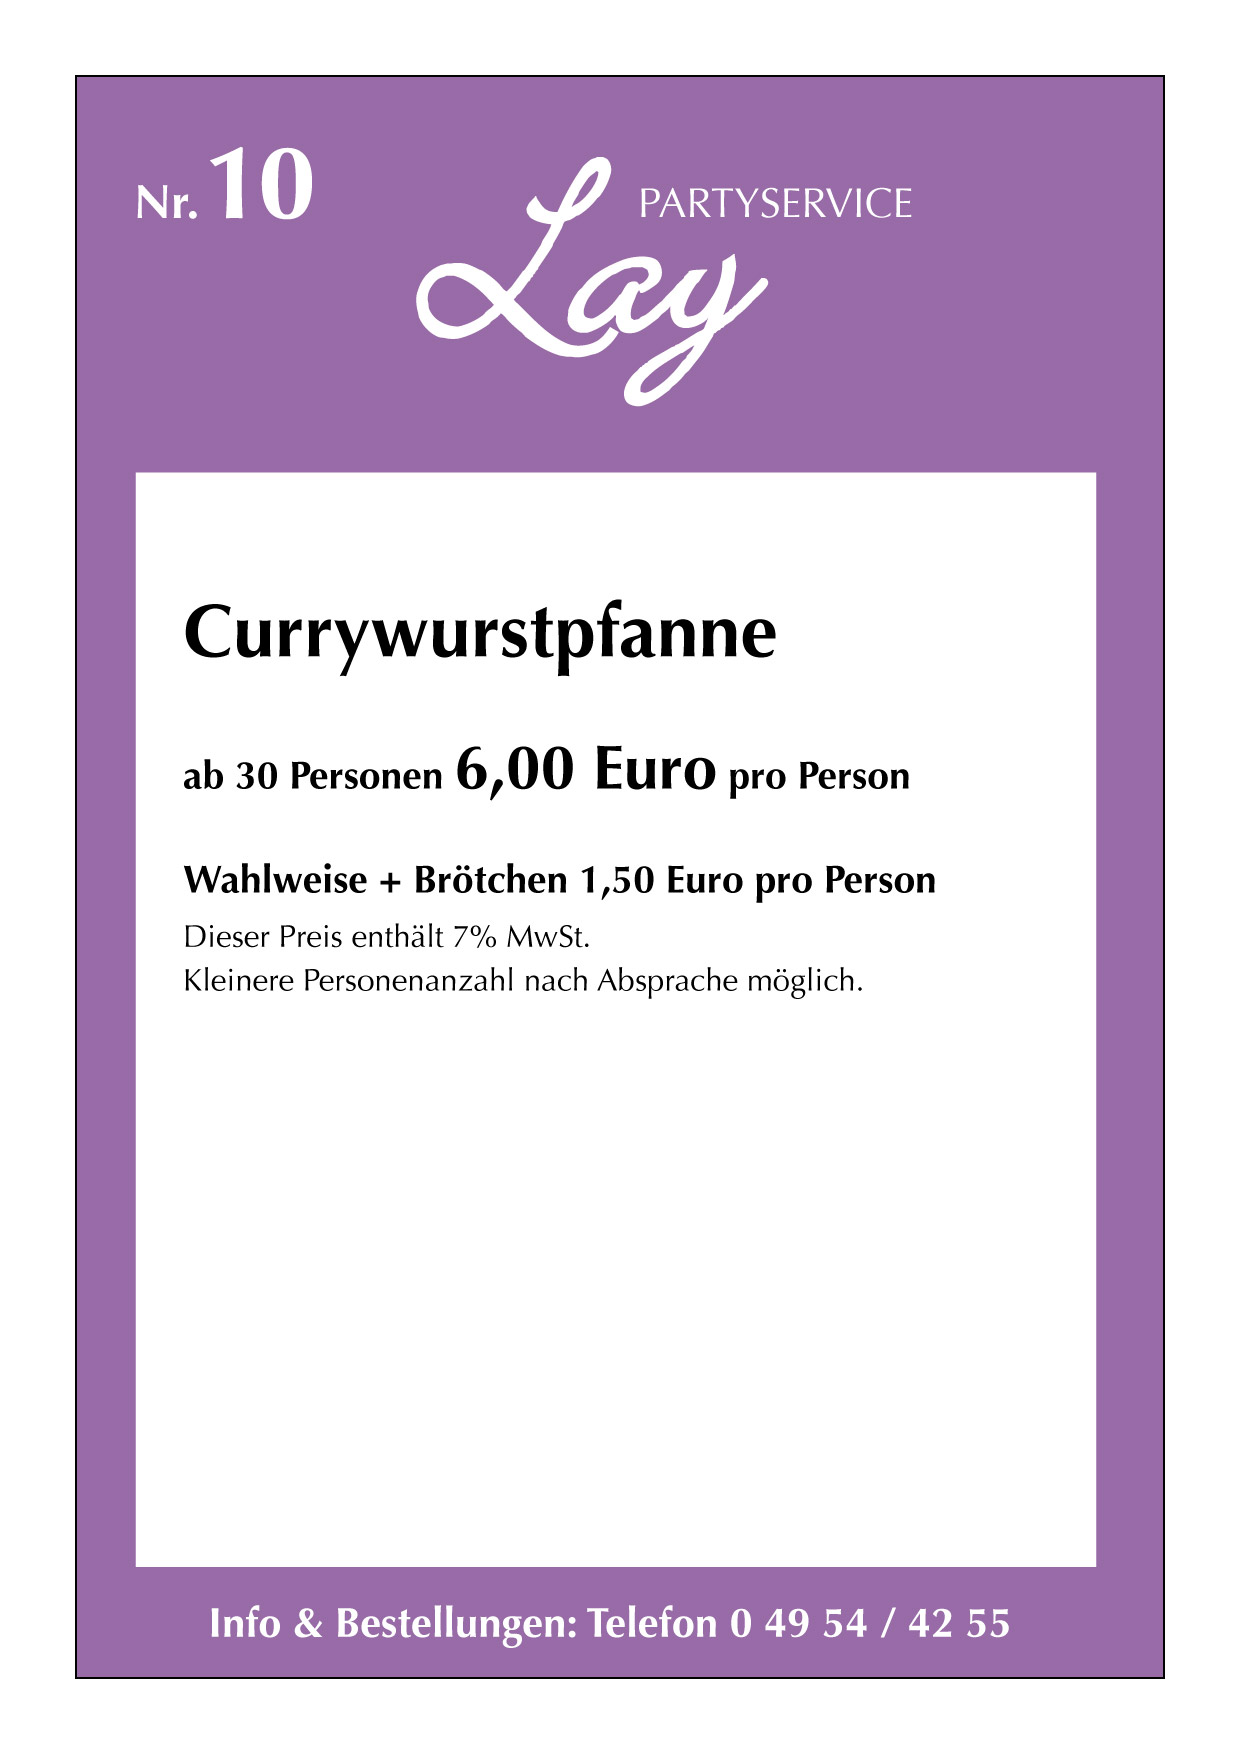 LAY-PARTY-Currywurstpfanne